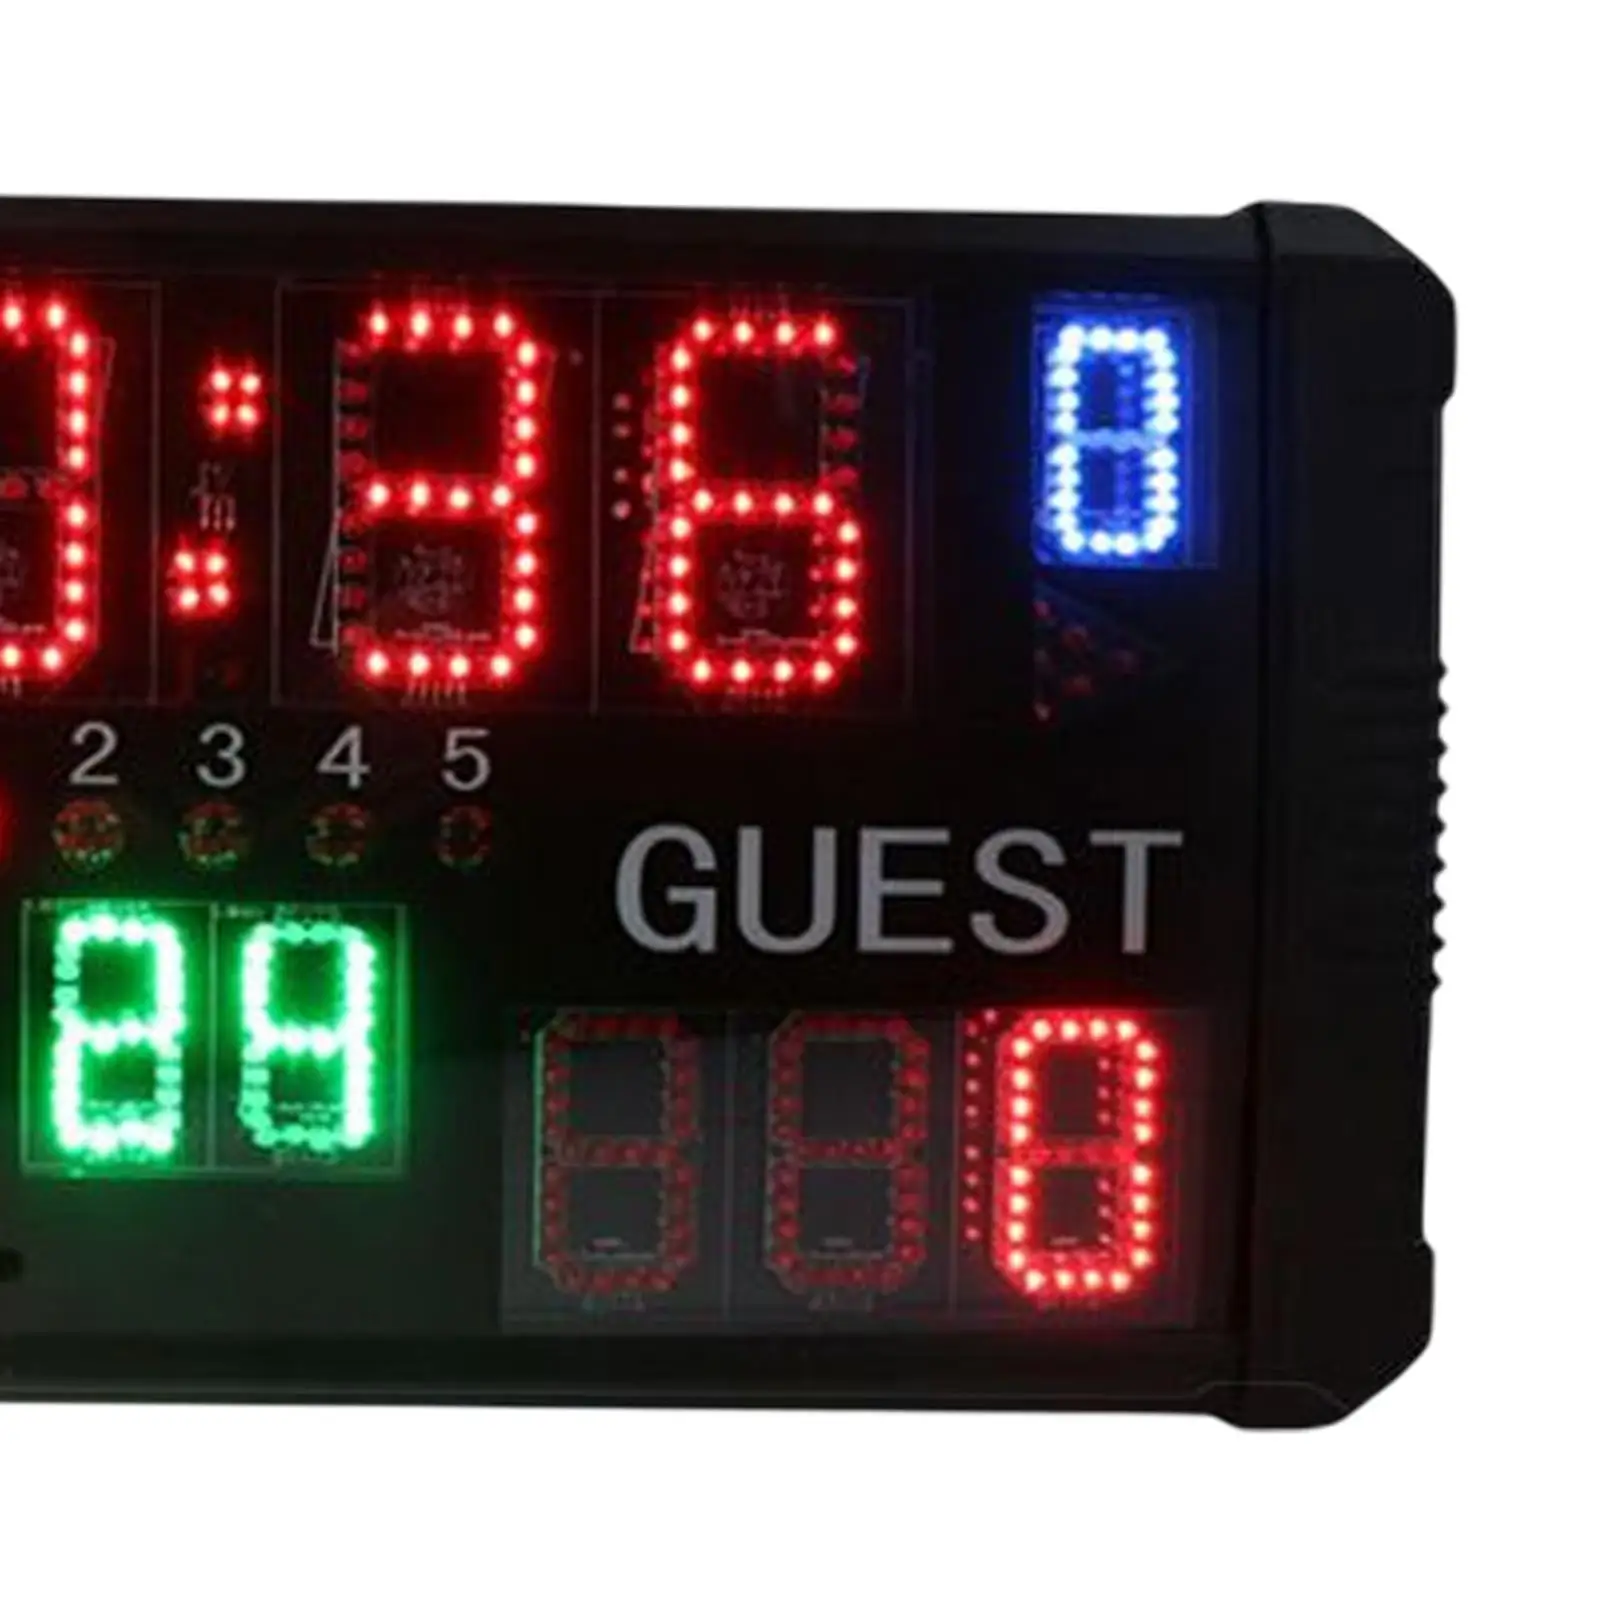 Multifunctional Electronic Digital Scoreboard Foul Count Volleyball Tennis